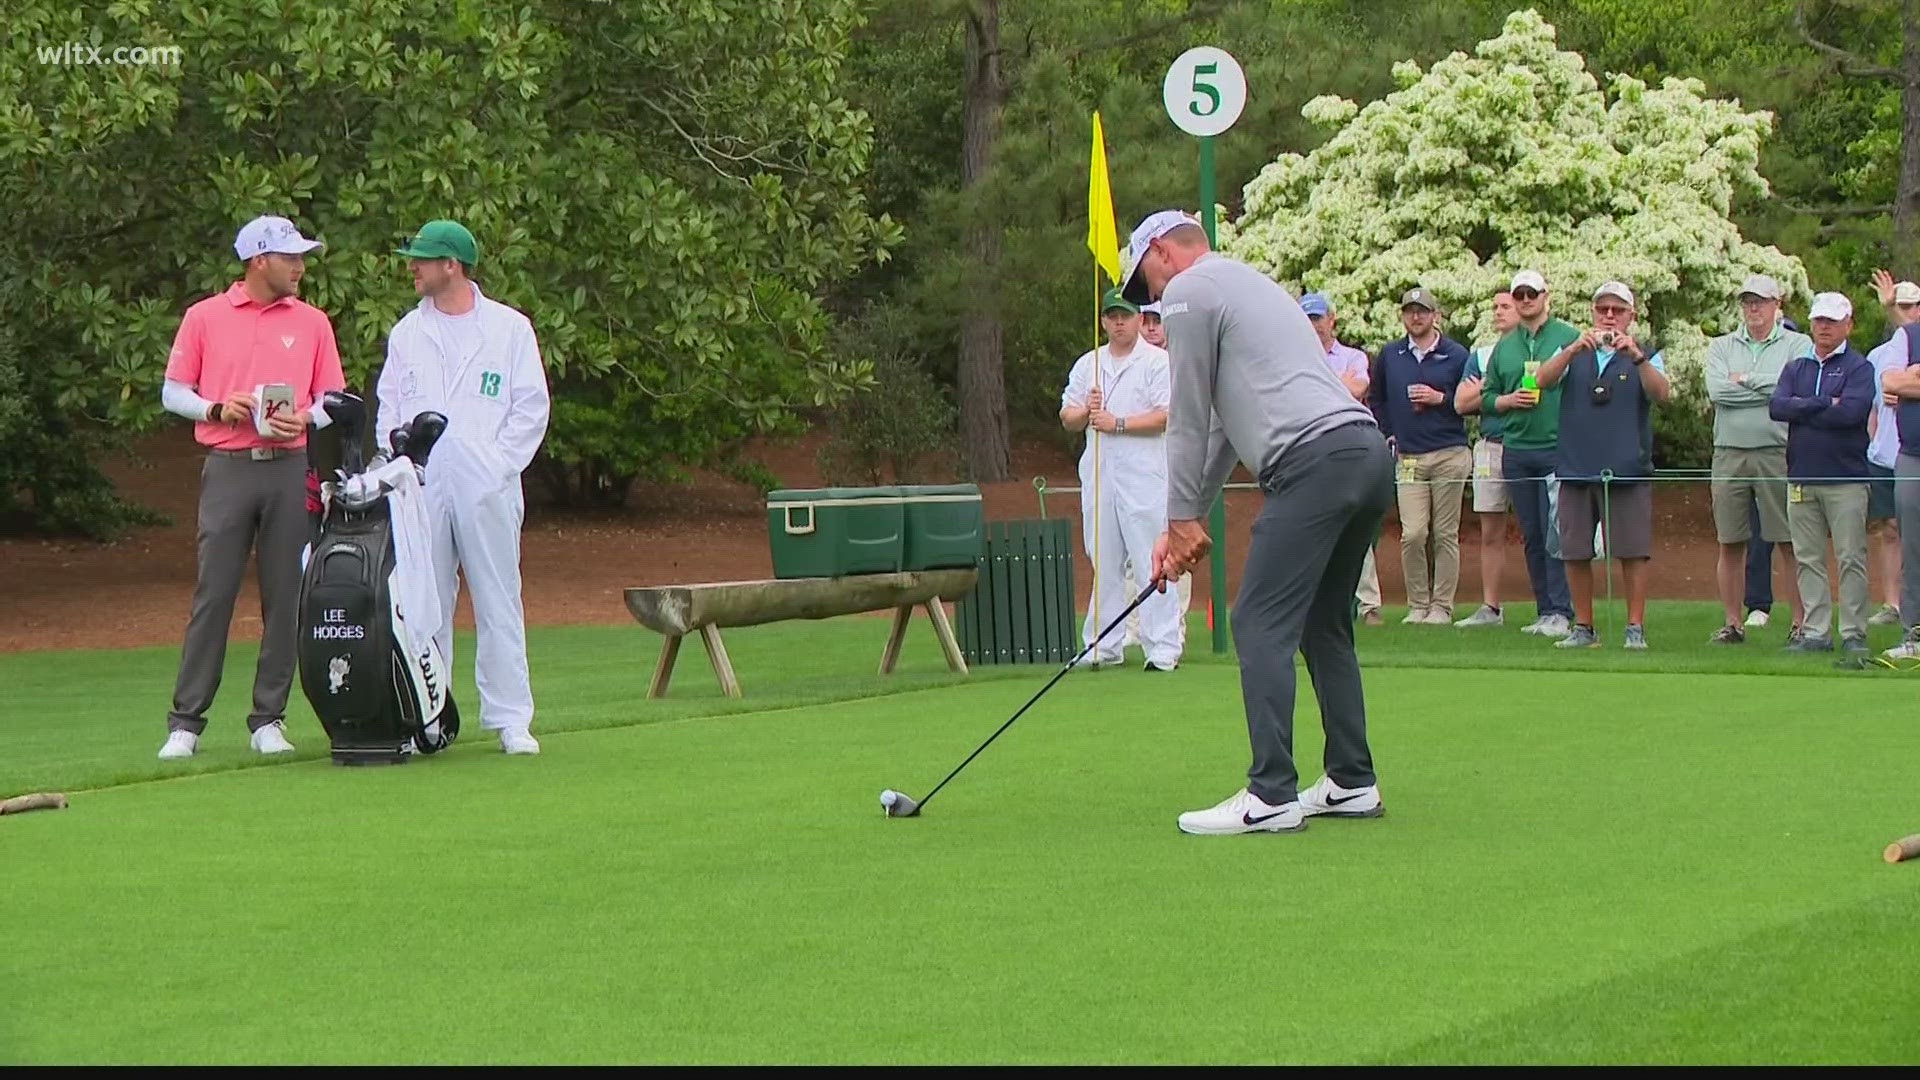 Greenville native Lucas Glover has a deep appreciation for the Masters since he first came to the Augusta National Golf Club when he was just six years old.